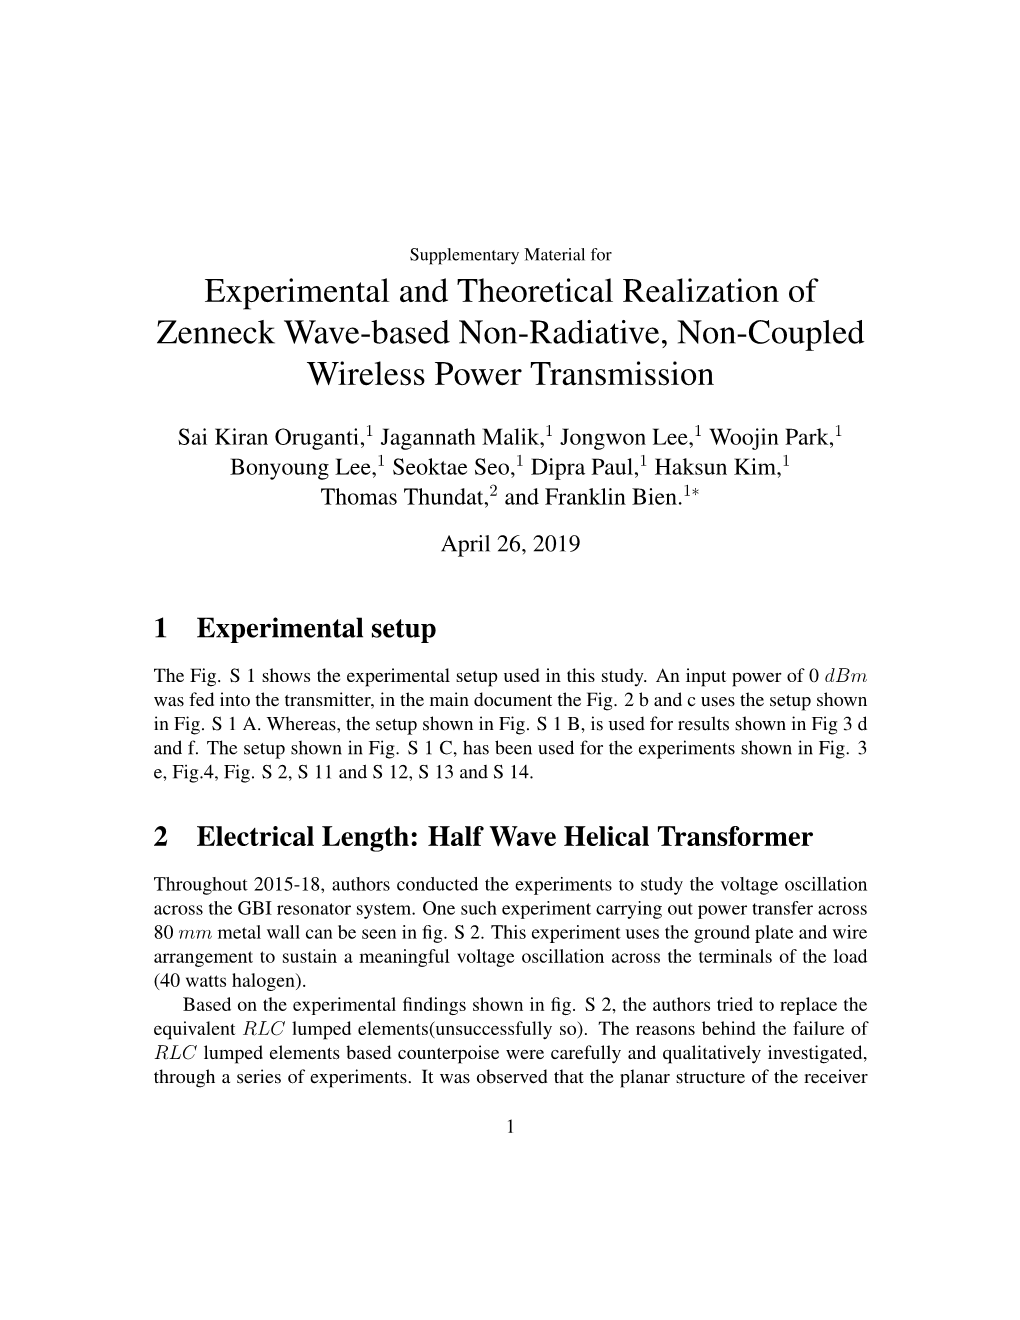 Experimental and Theoretical Realization of Zenneck Wave-Based Non-Radiative, Non-Coupled Wireless Power Transmission